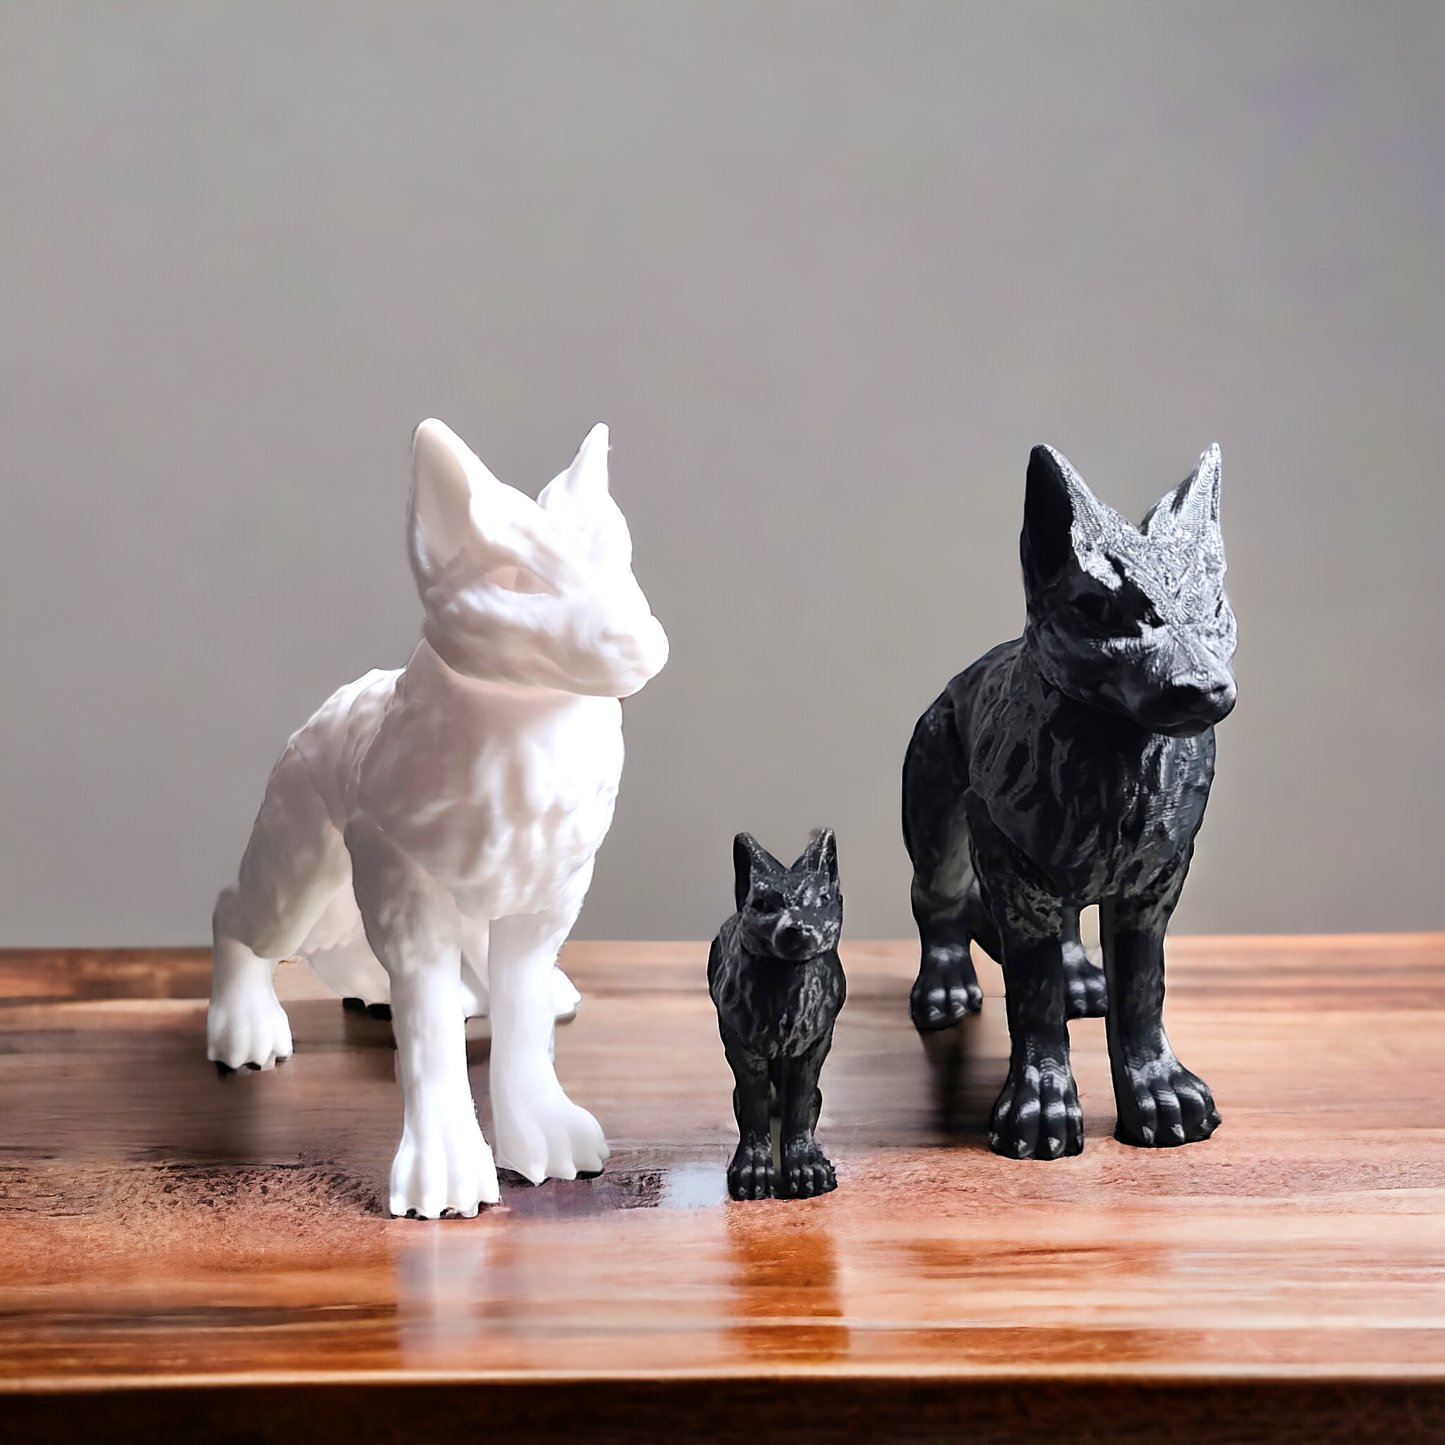 3d print, Realistic wolf, 3d animal, wolf lover, gift for him, kid toys, animal lover, birthday gift, exotic animal